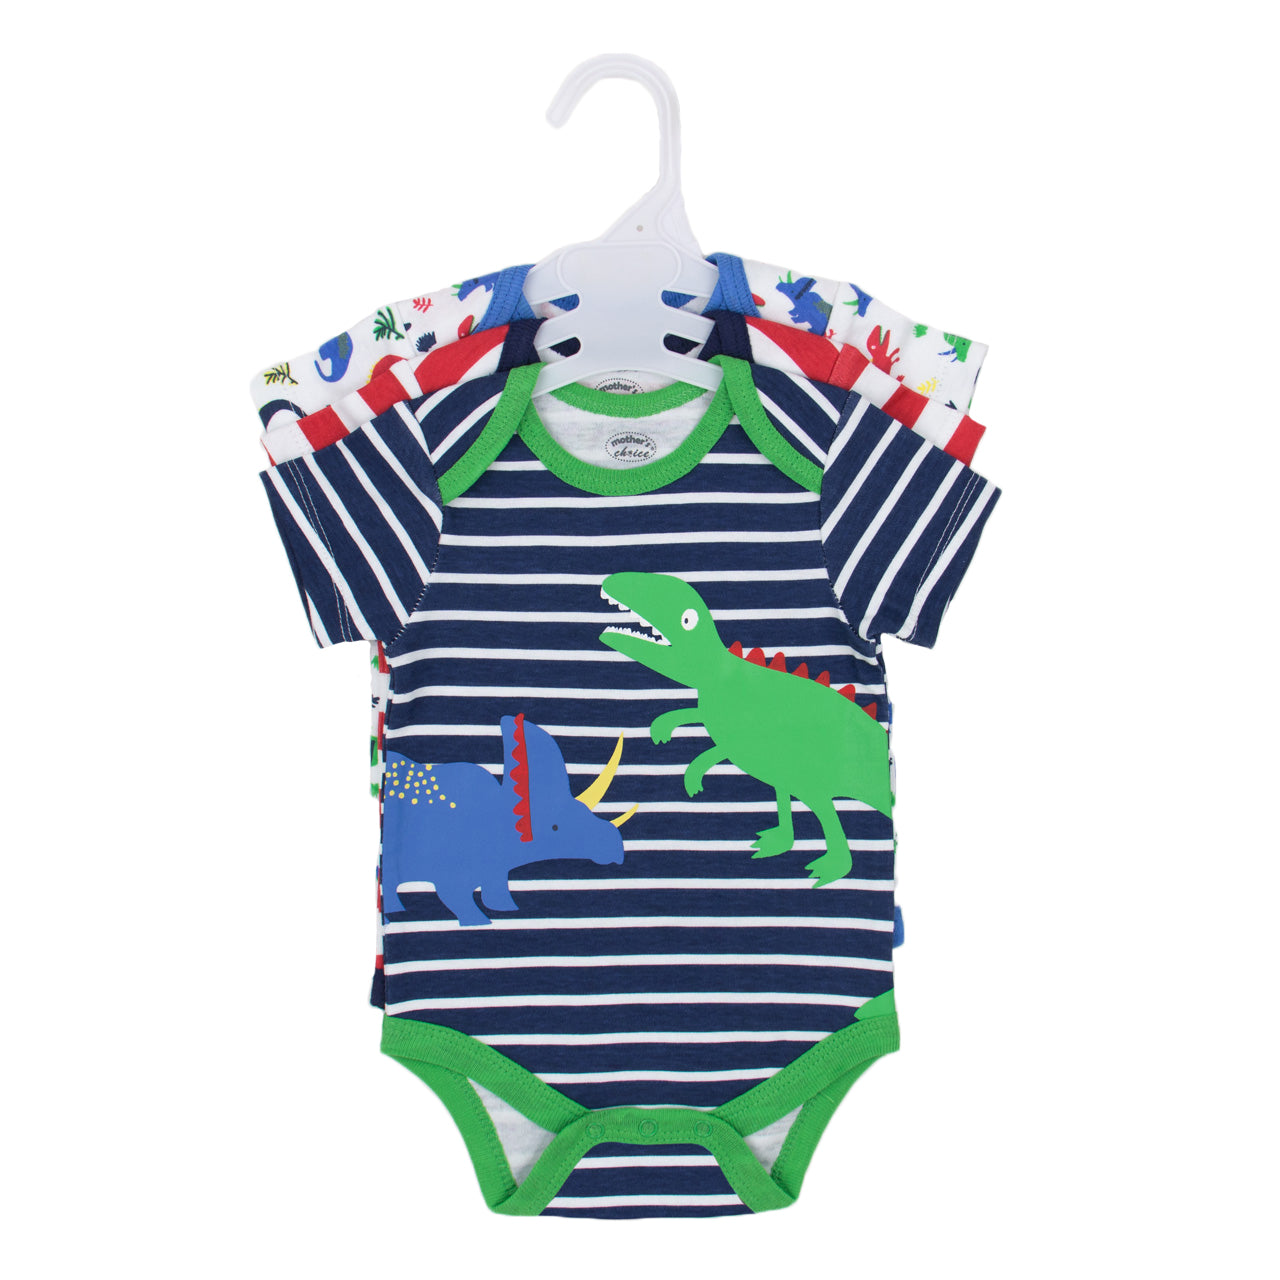 Mother's Choice 3 Pack Short Sleeves Onesie (Dinosaurs/IT2352)